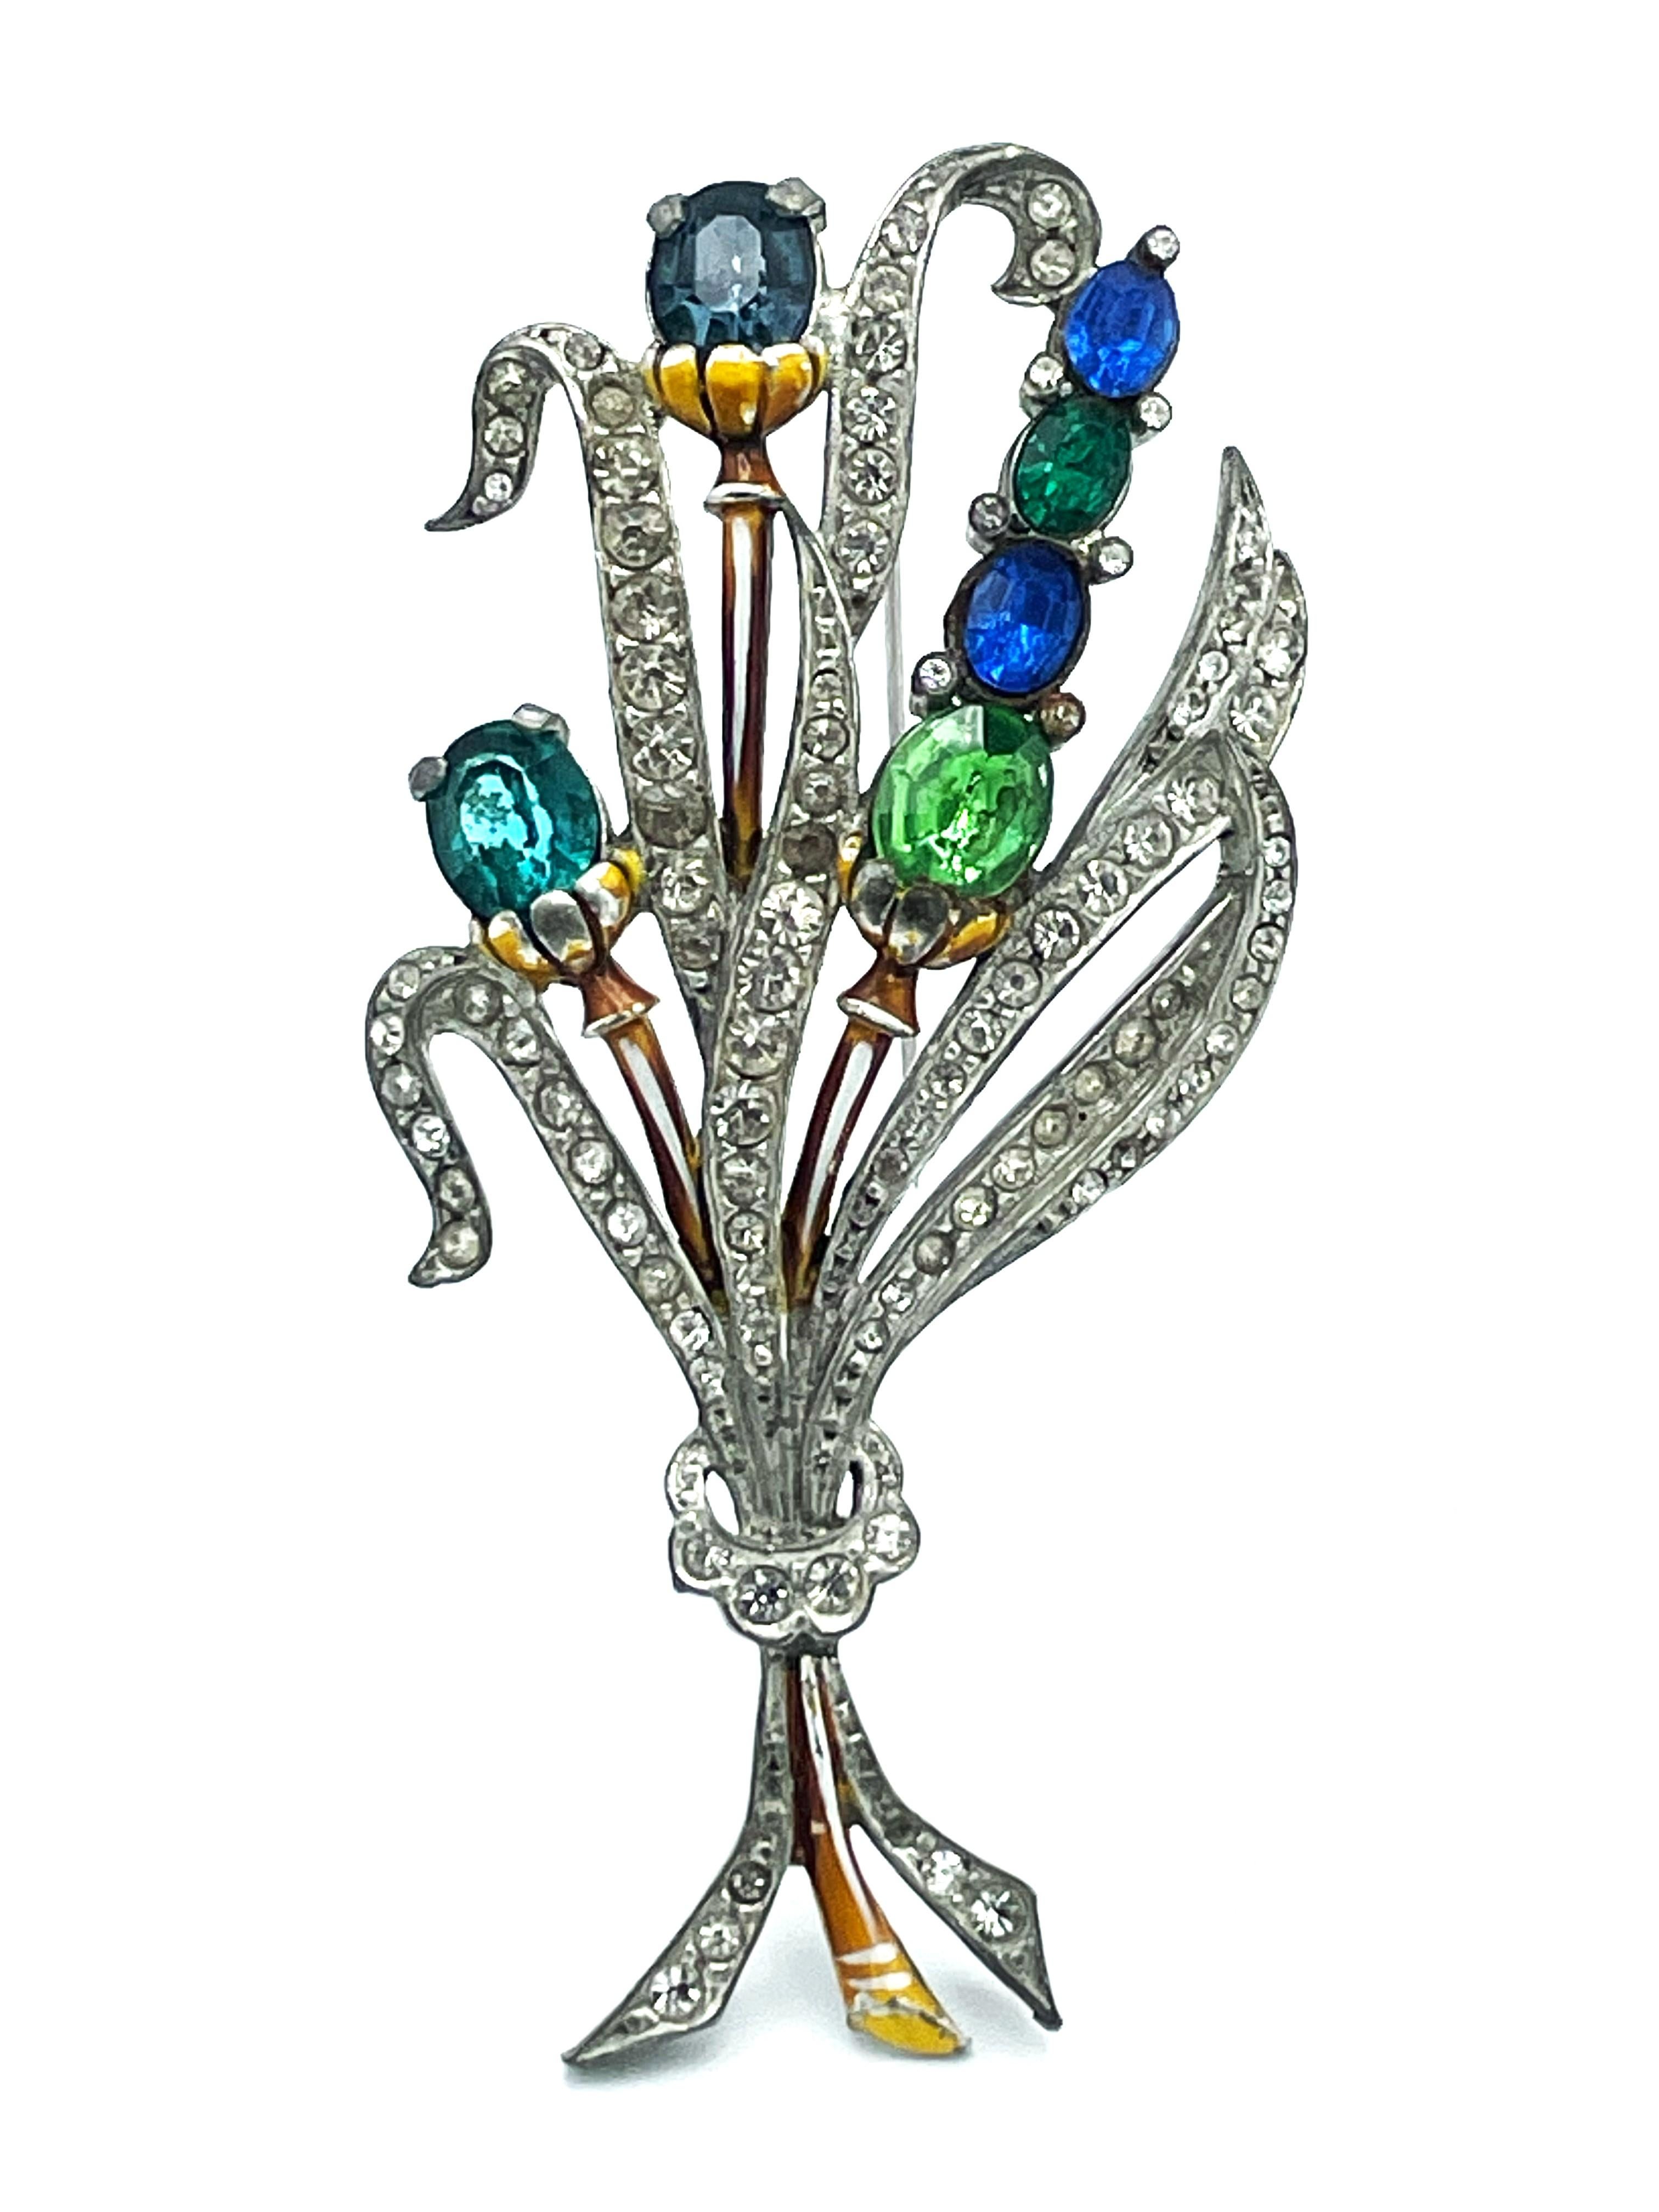 Very early bouquet brooch from the 1930/40s USA. Blue - green cut rhinestones and the leaves filled with clear set rhinestones. The brooch is made of potash, typical for this time.

Dimensions:
Height of the brooch 9 cm, width 4.5 cm
This early